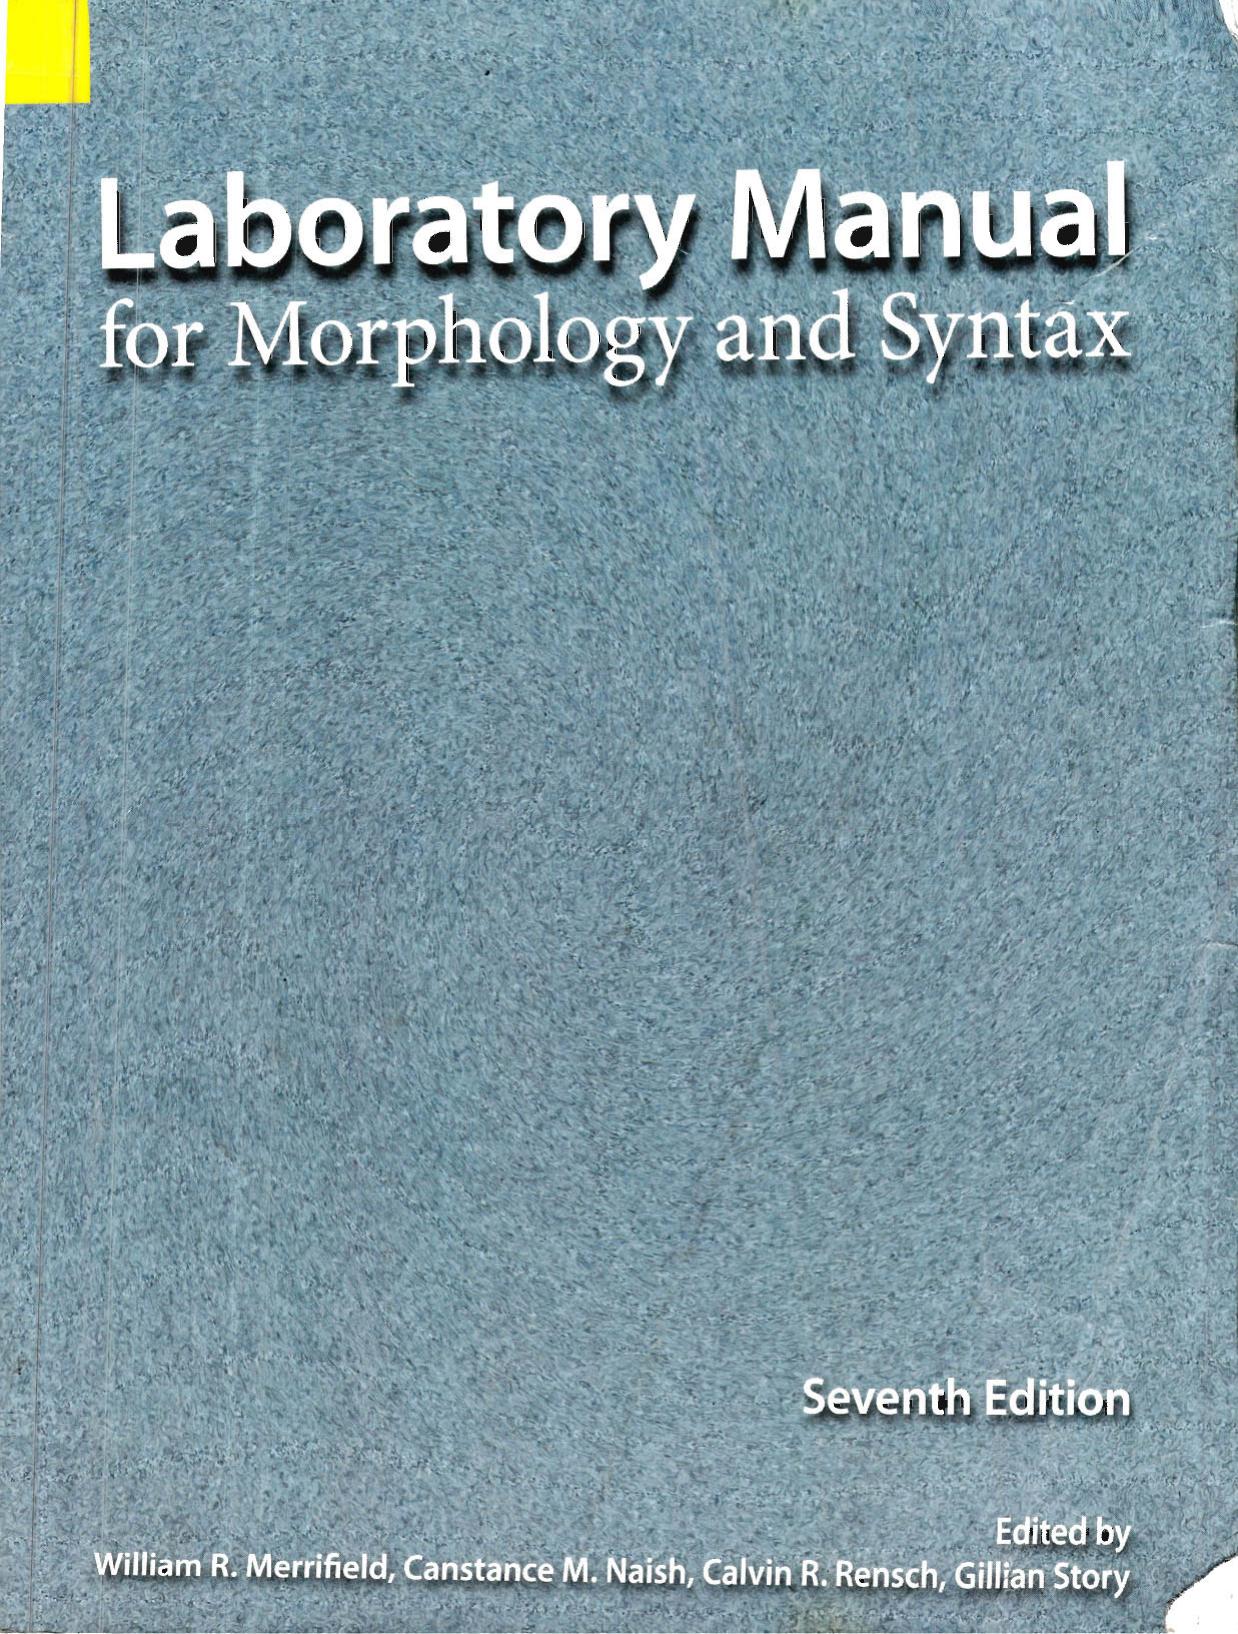 Laboratory Manual for Morphology and Syntax